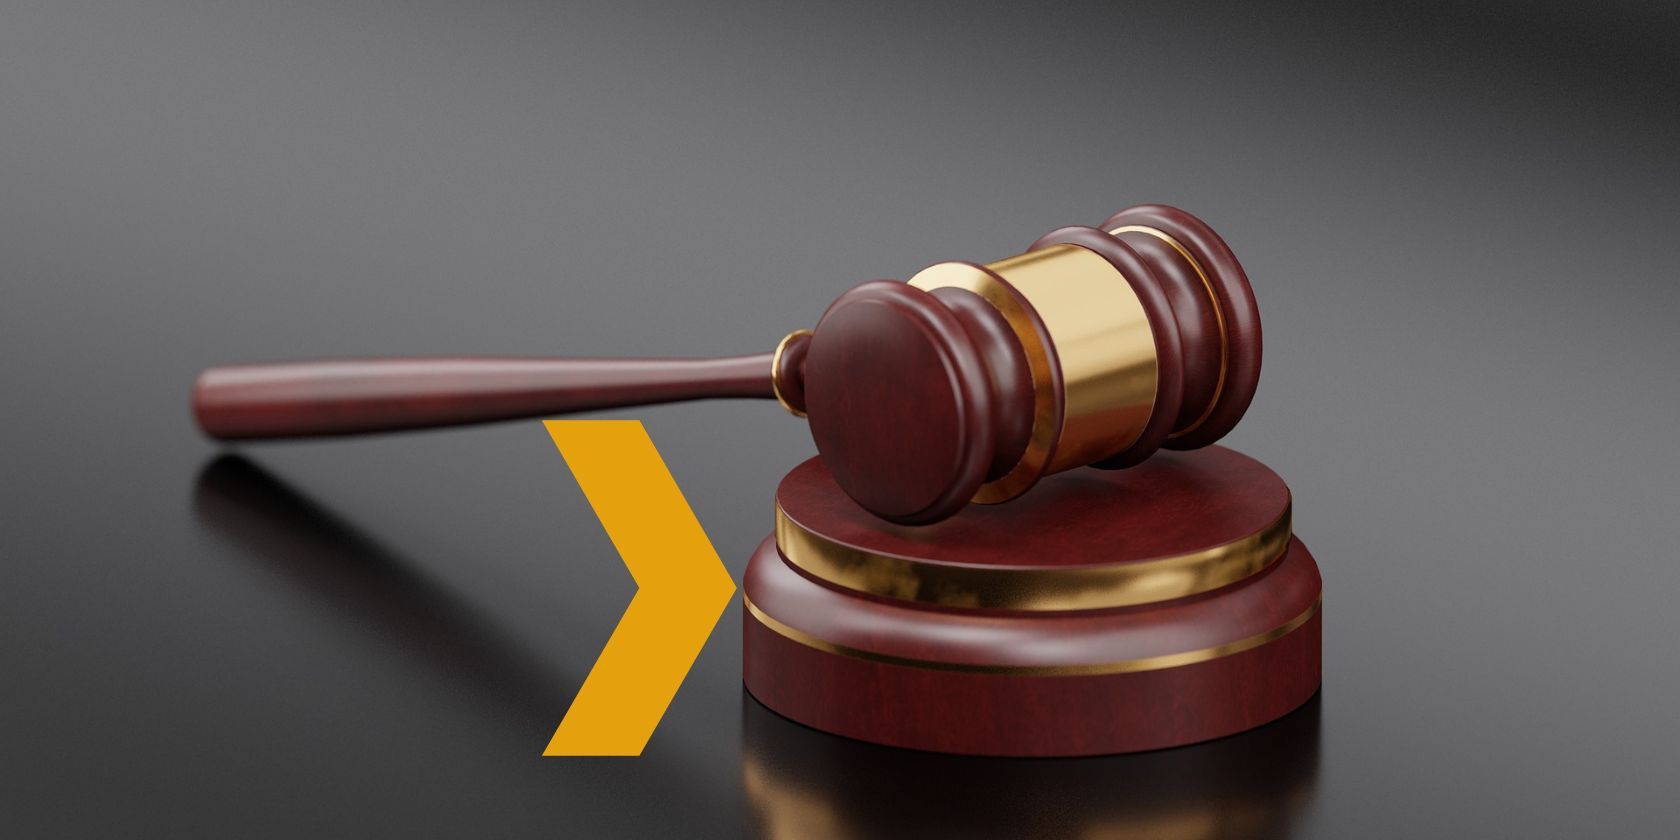 A wooden gavel with the Plex logo superimposed onto the image